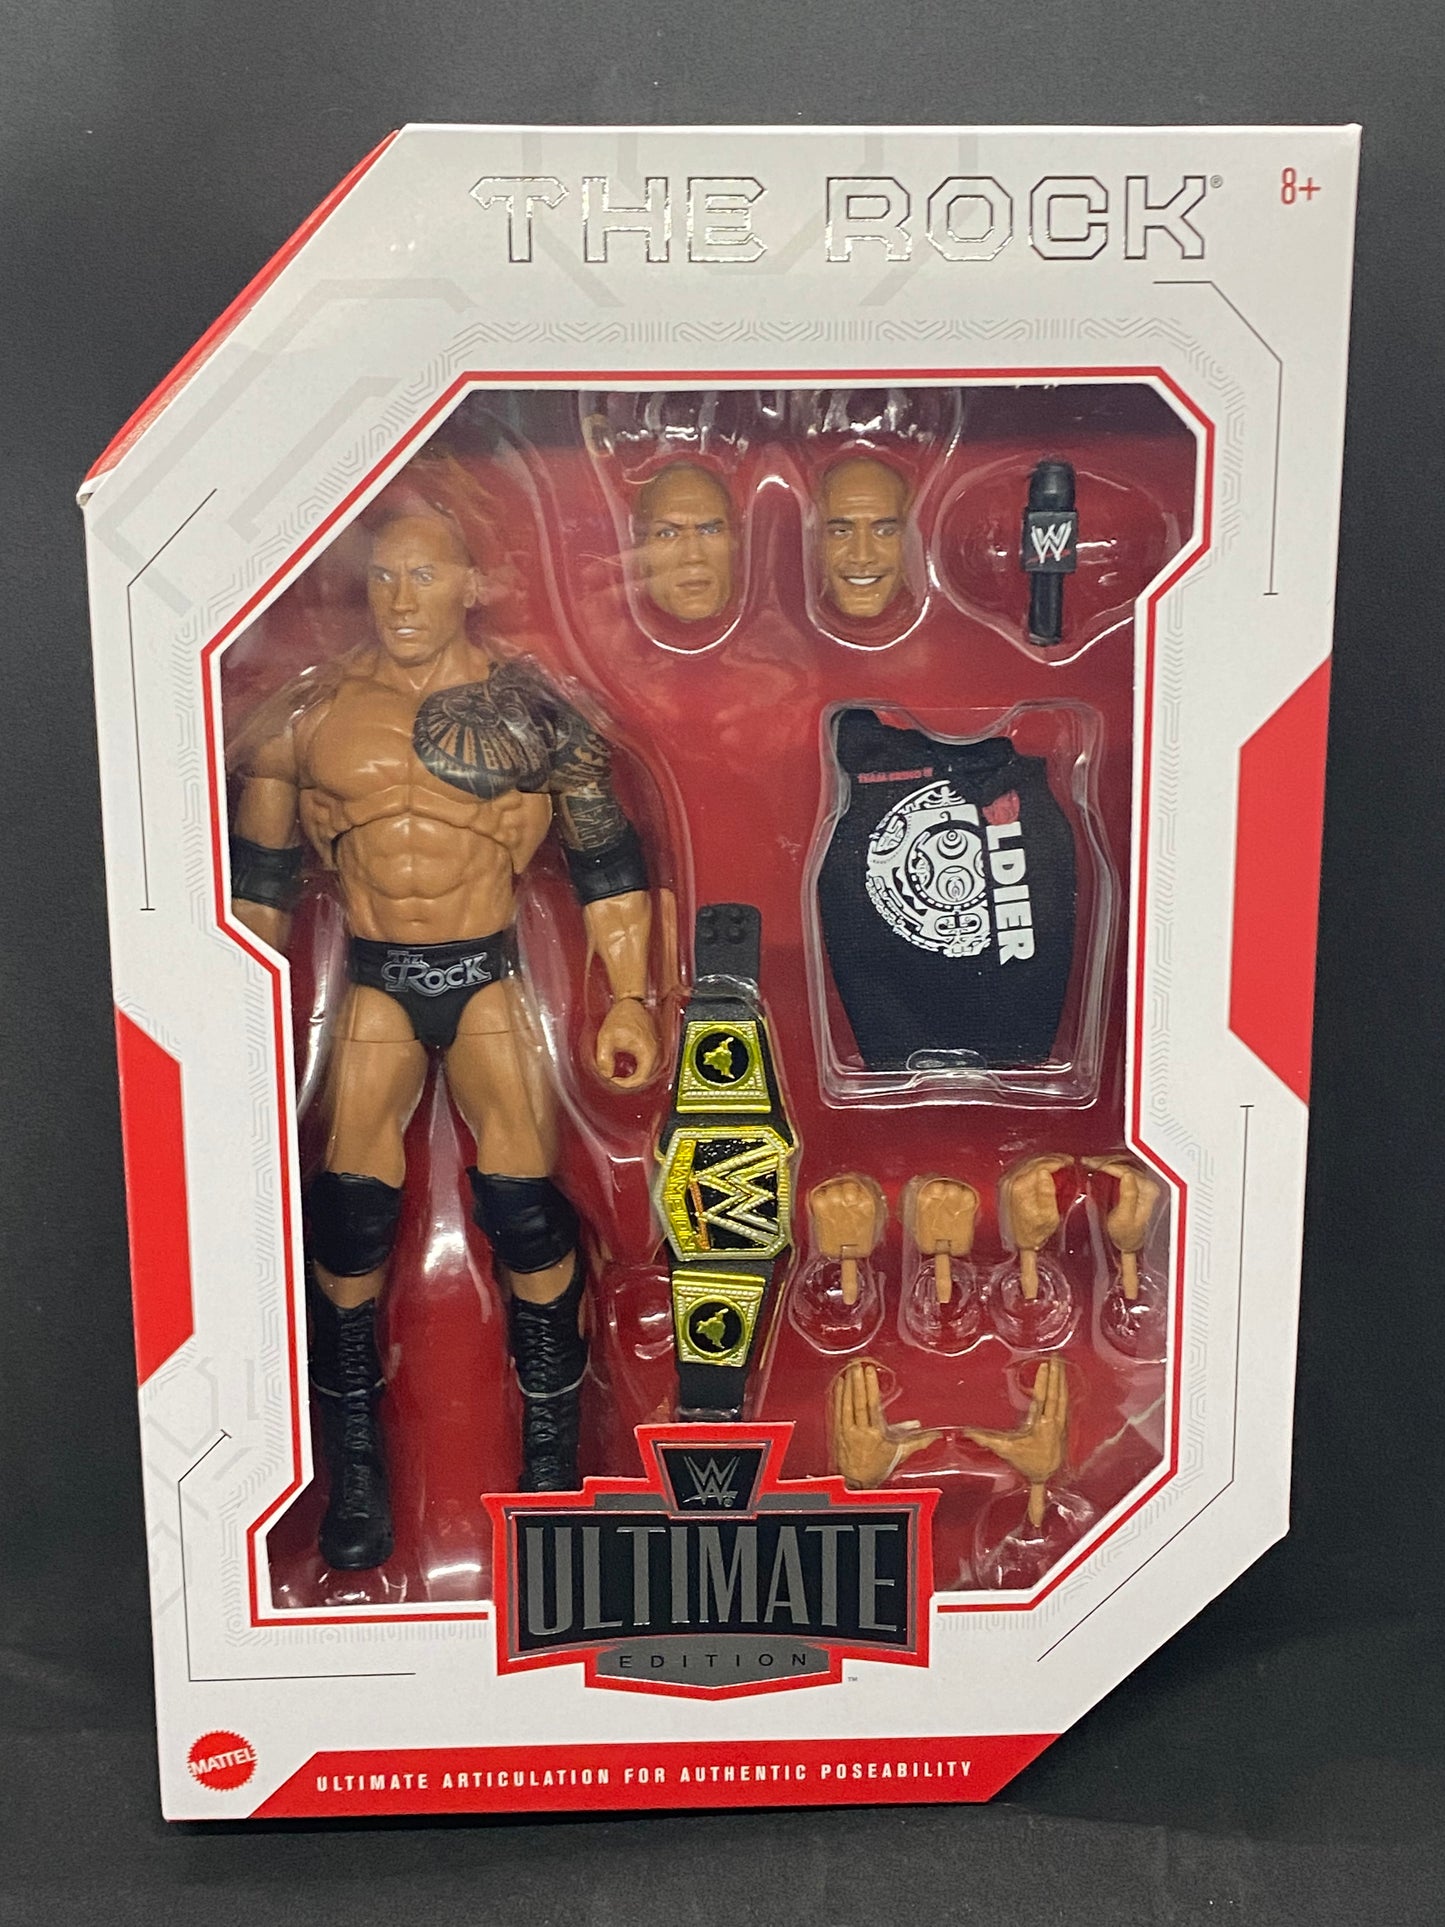 WWE Ultimate Edition Series 10 The Rock w/ WWE Championship belt and shirt